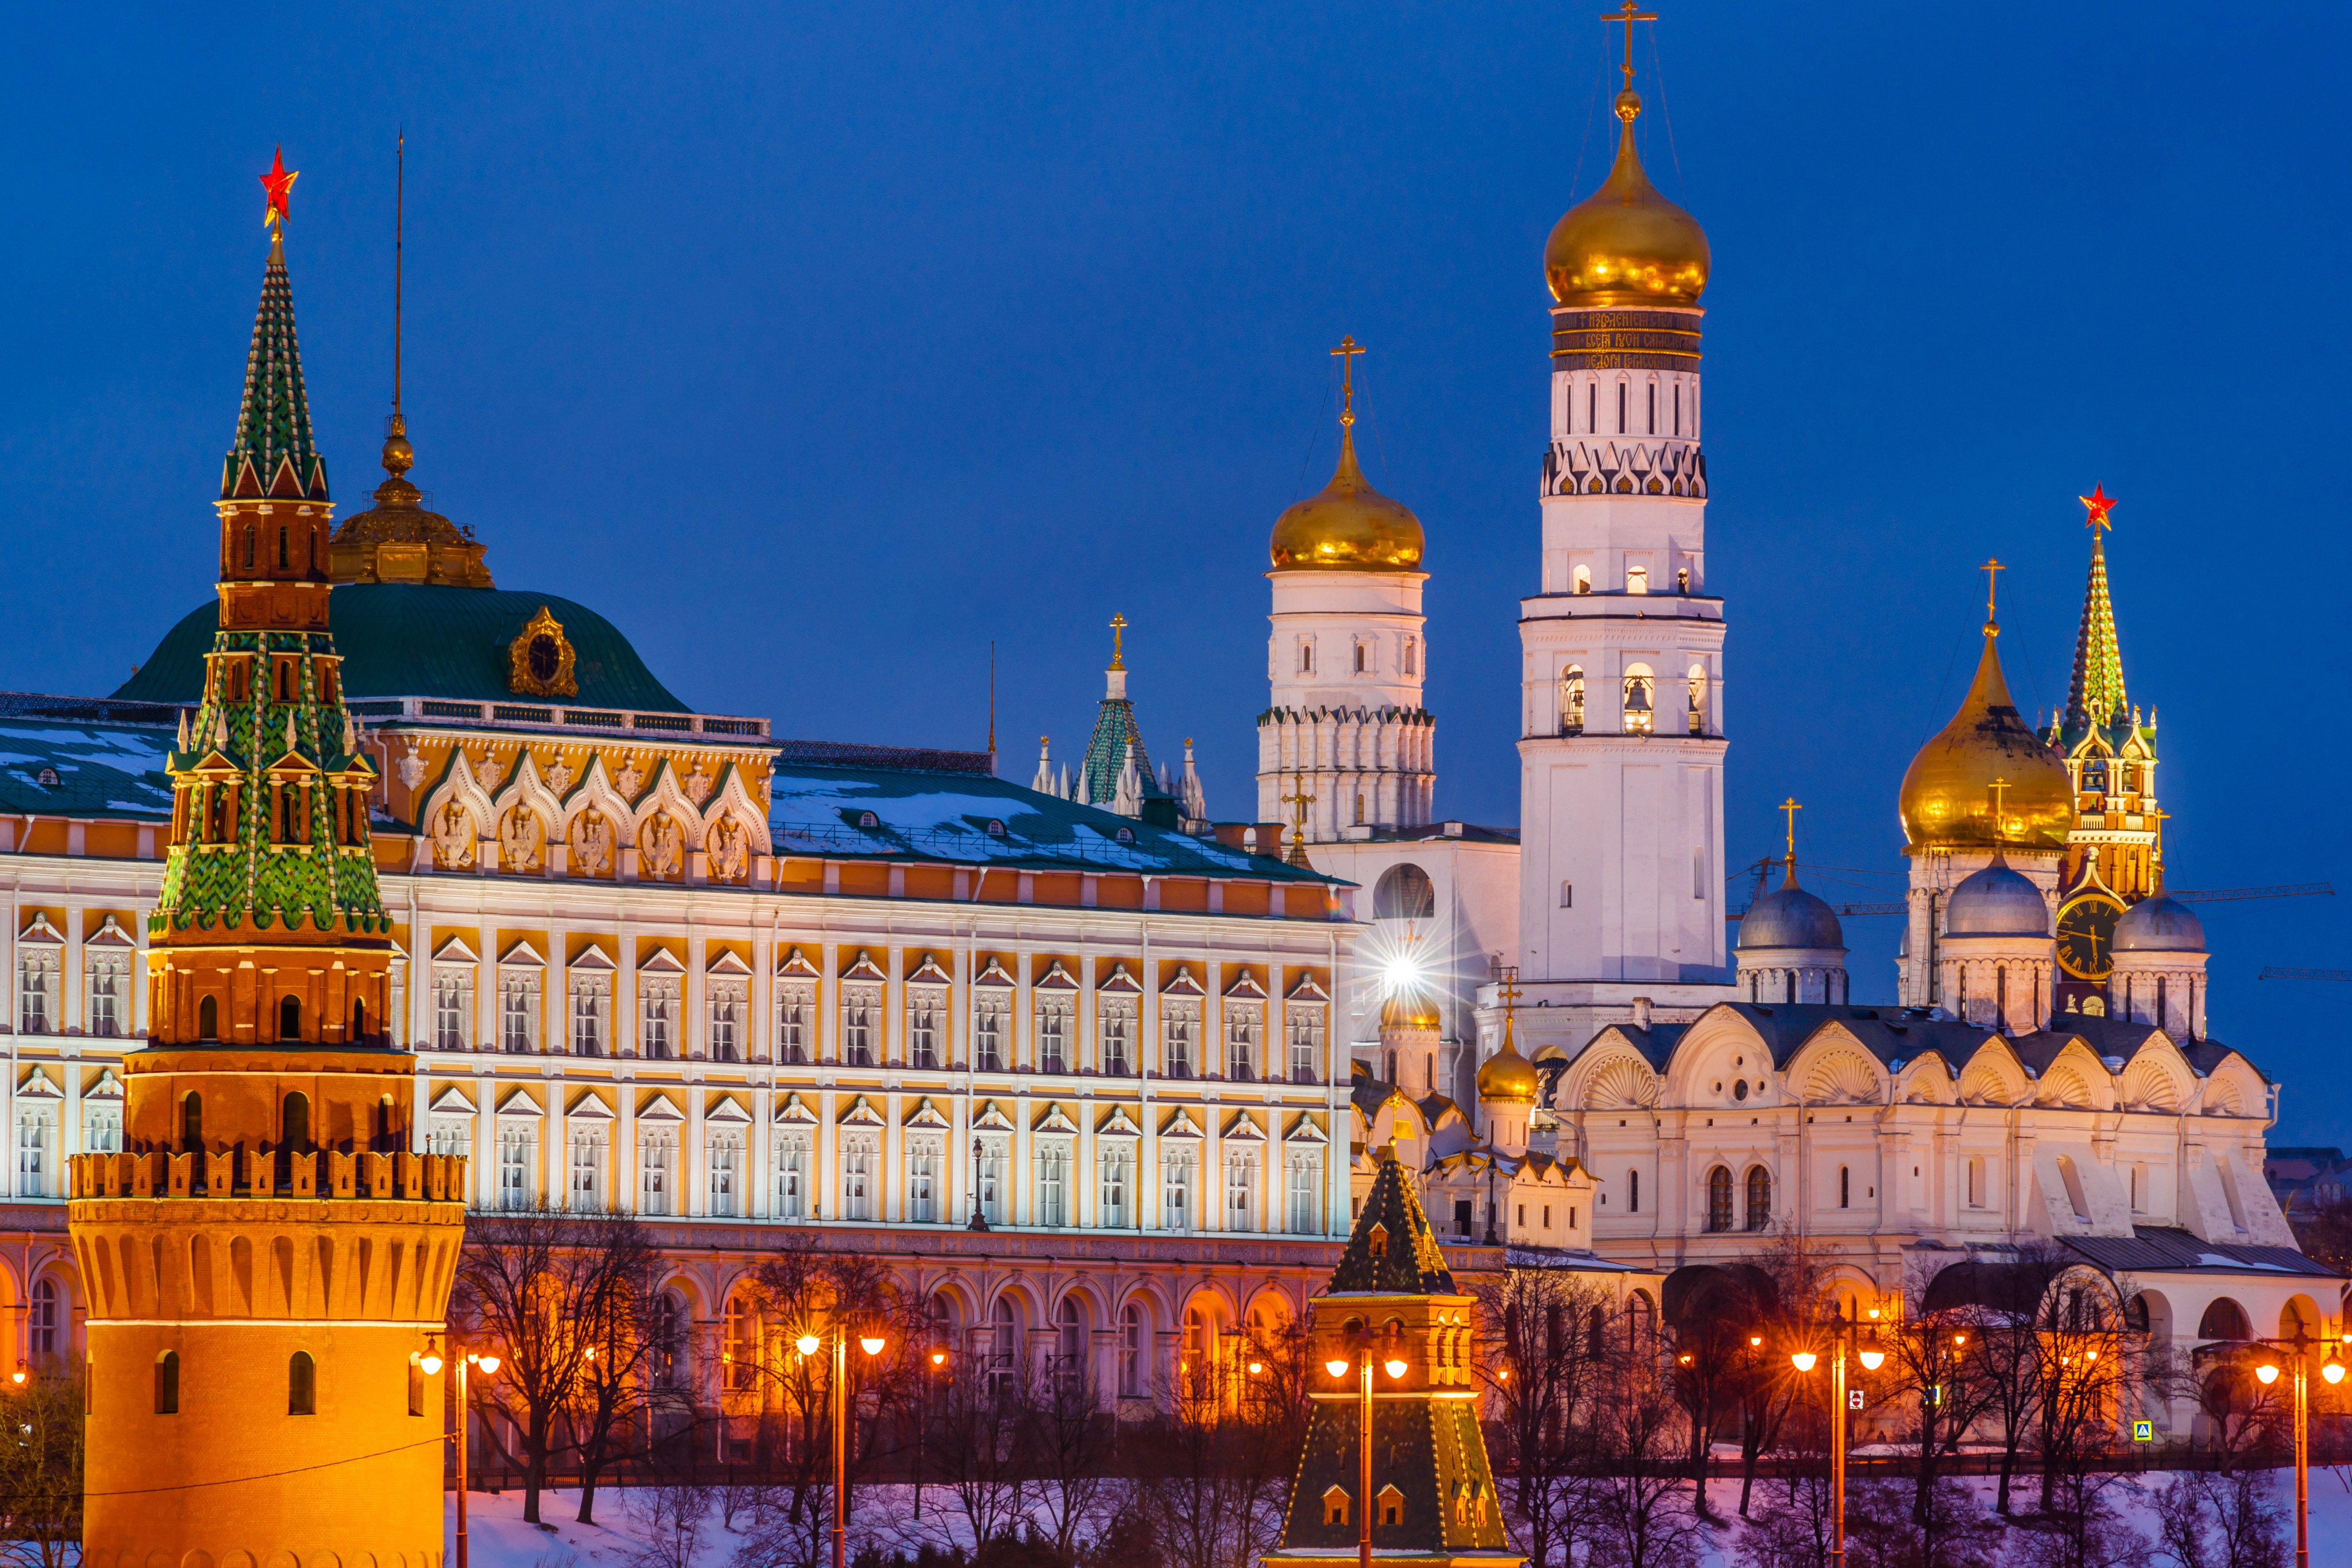 The Kremlin has repeatedly said that any seizure of its assets would go against all the principles of free markets which the West proclaims. Photo: Shutterstock